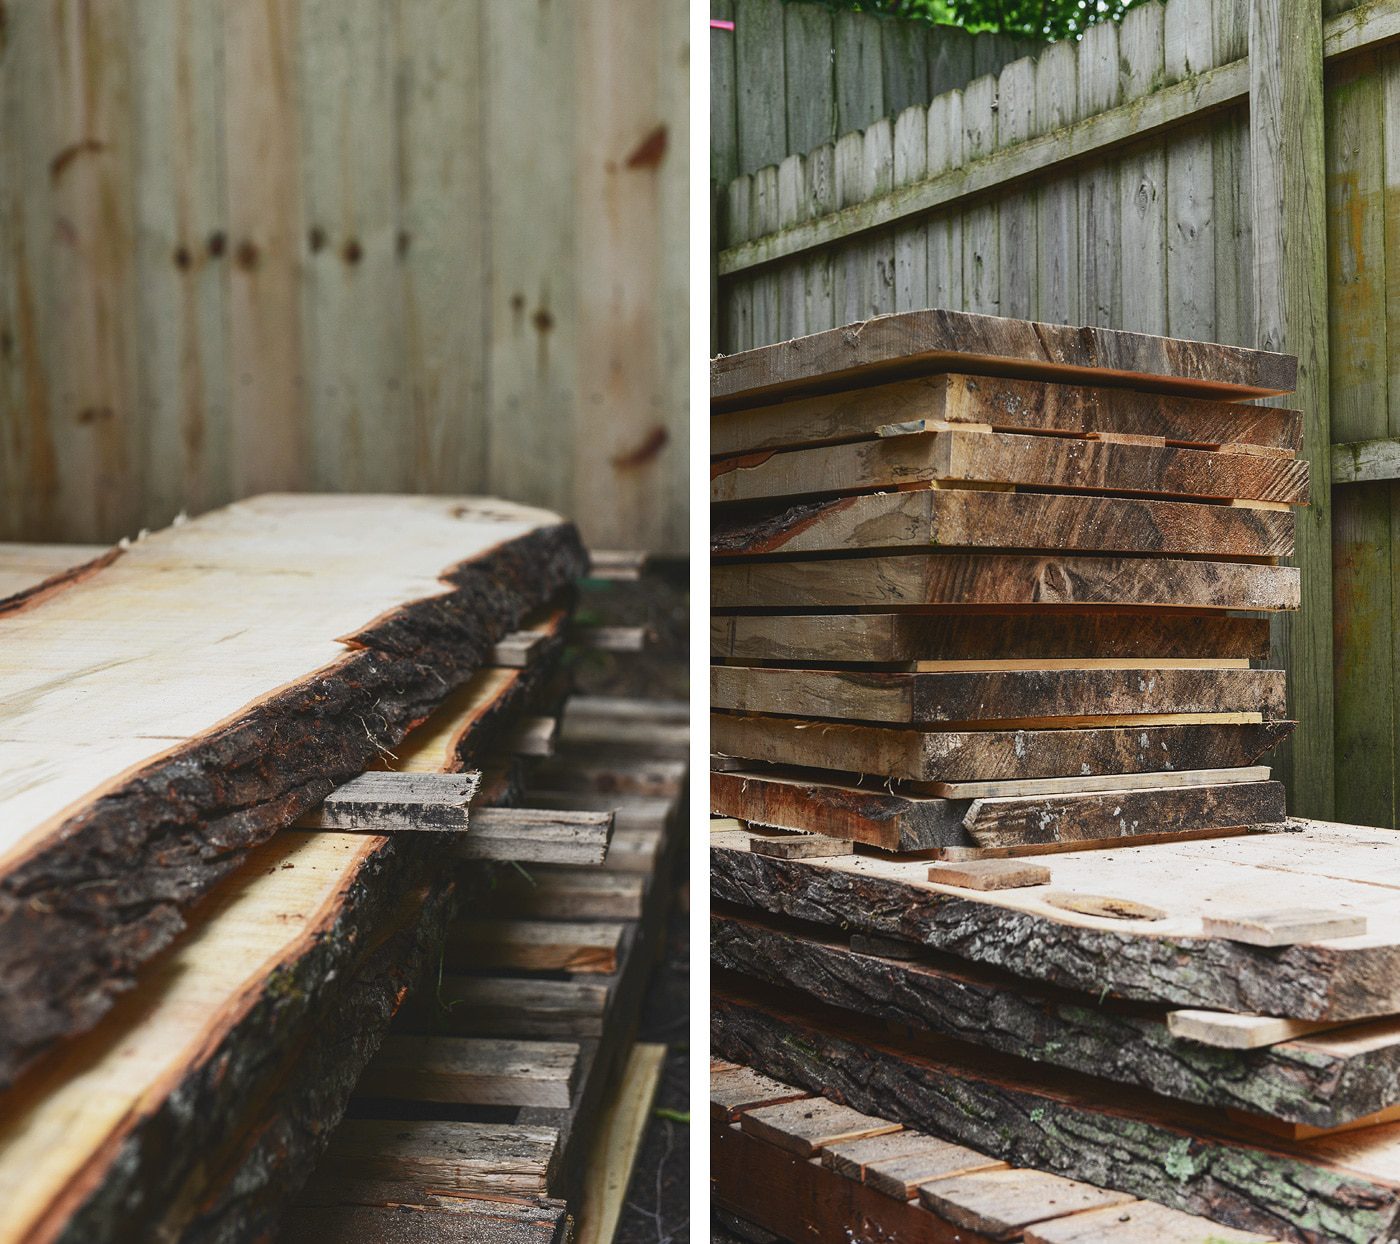 Portable wood milling: How does it work? We're sharing our experience on Yellow Brick Home